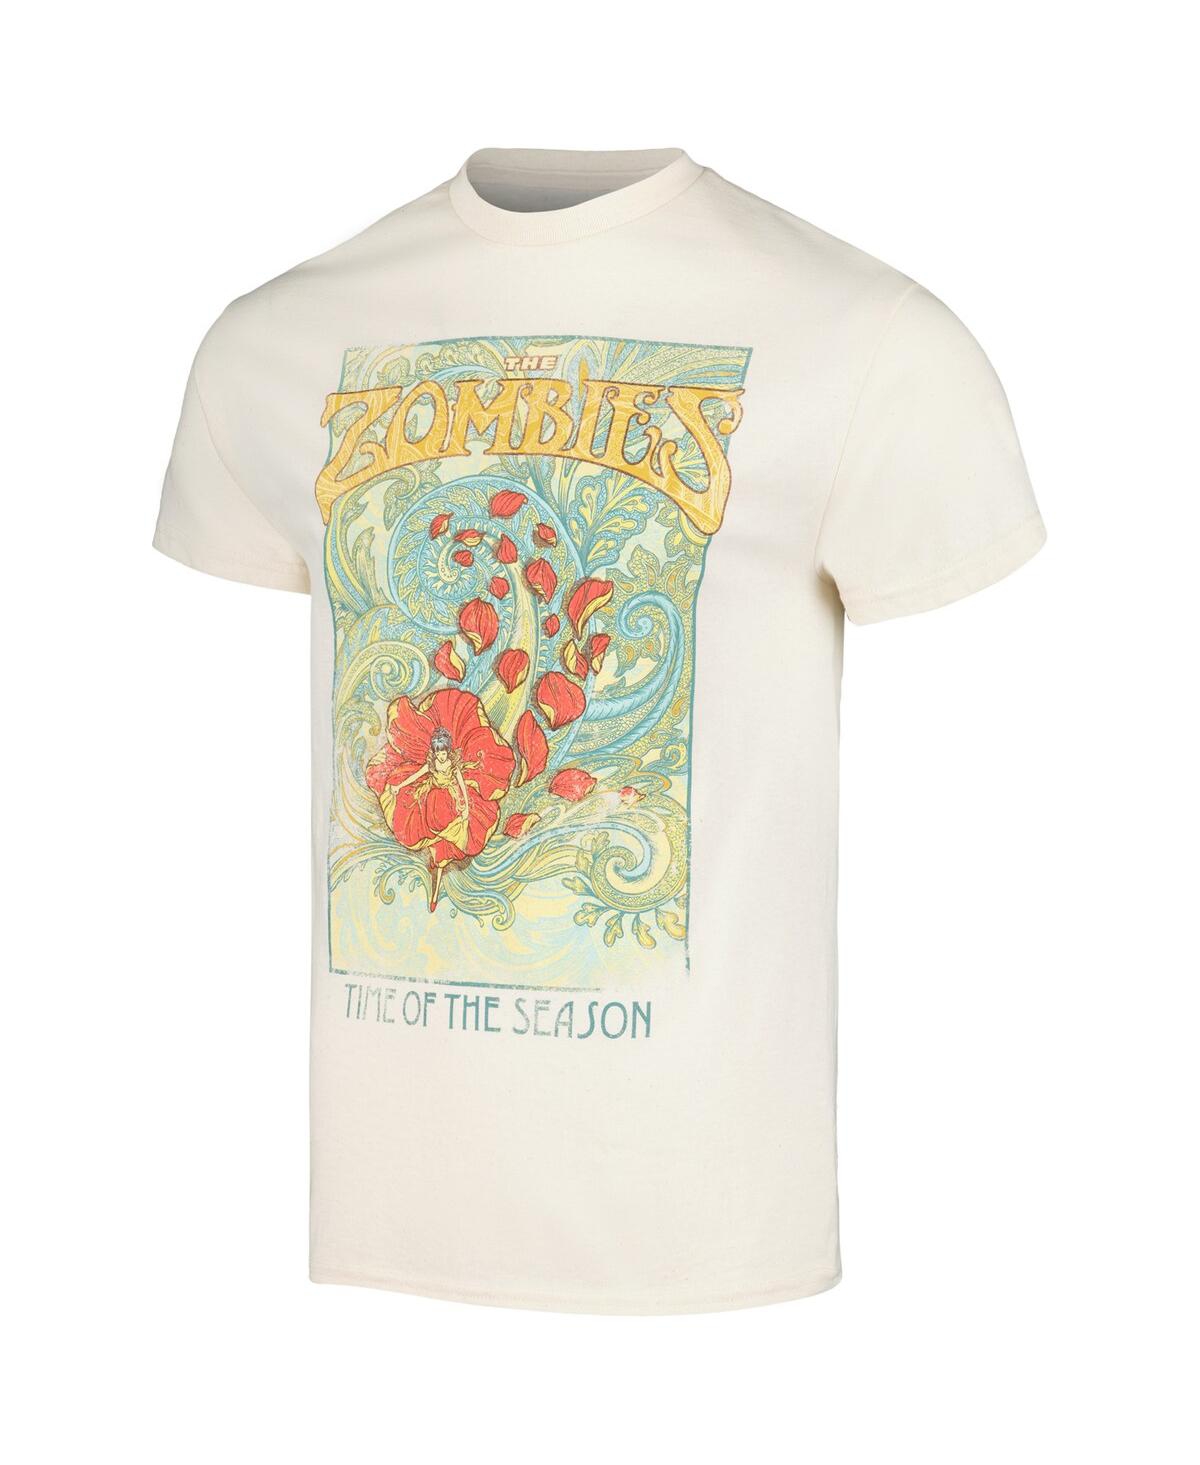 Shop Manhead Merch Men's  Cream The Zombies Time Of The Season Distressed Graphic T-shirt